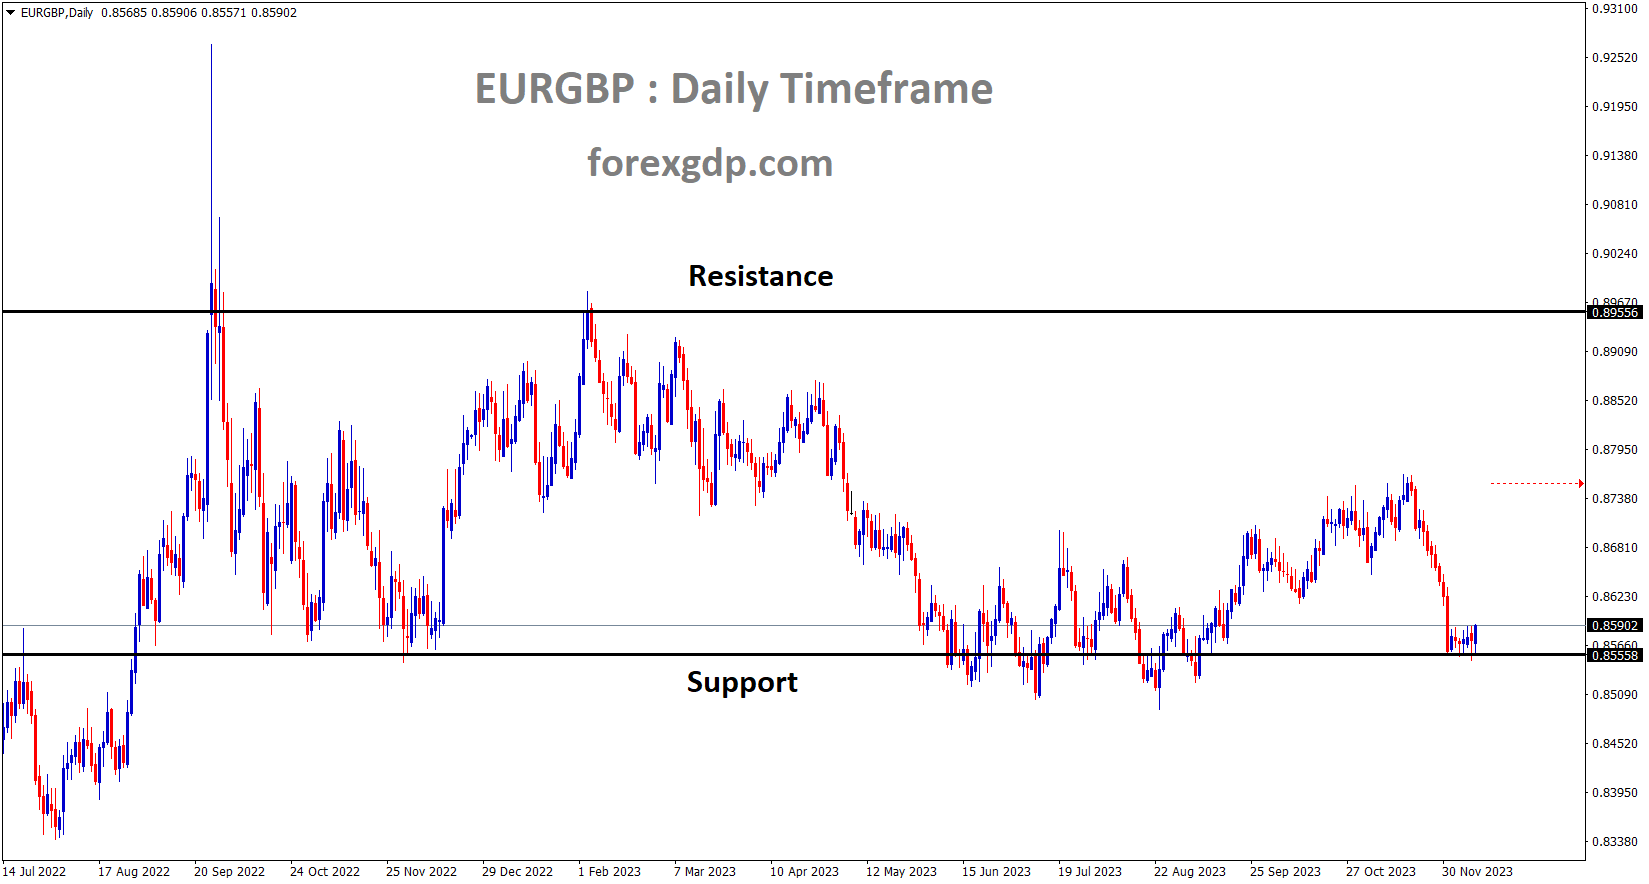 EURGBP is moving in a box pattern and the market has reached the support area